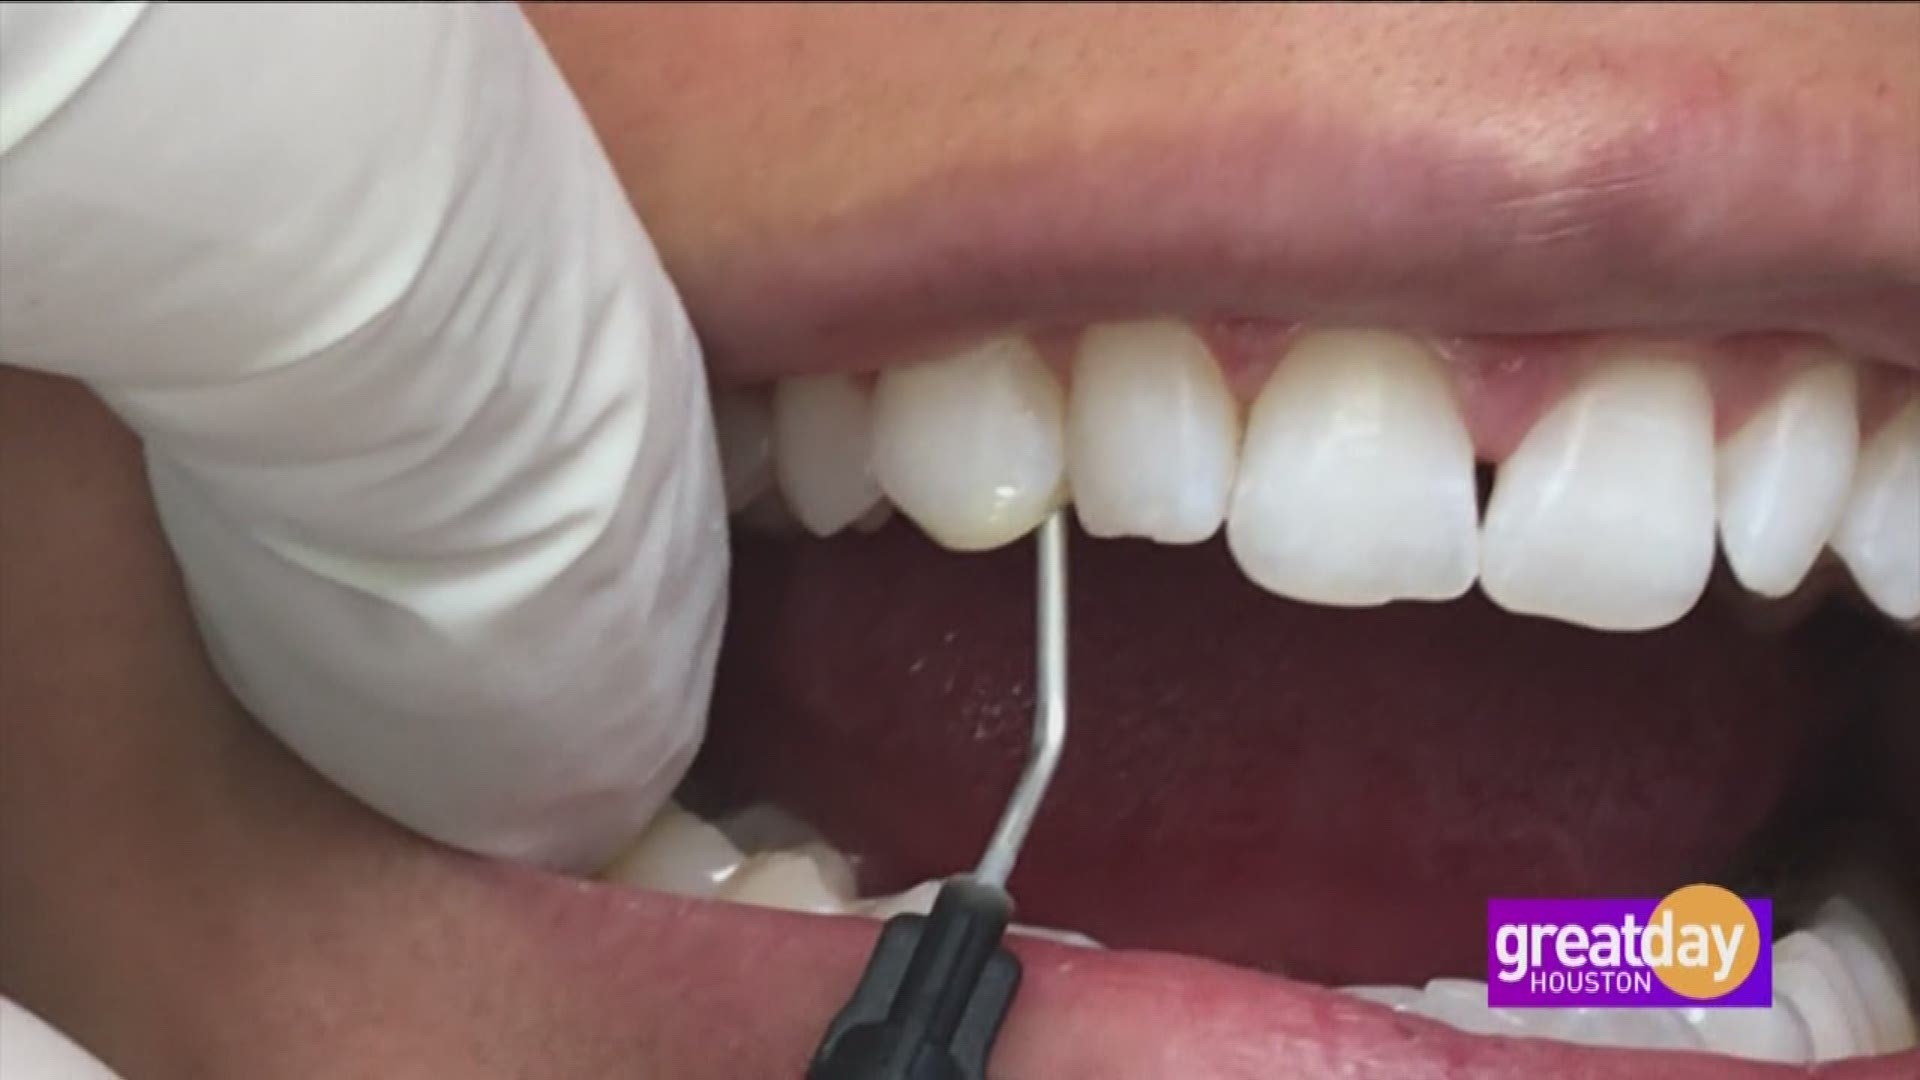 It's easy to upgrade your smile with Lumineers. Dr. Terri Alani shows us how.